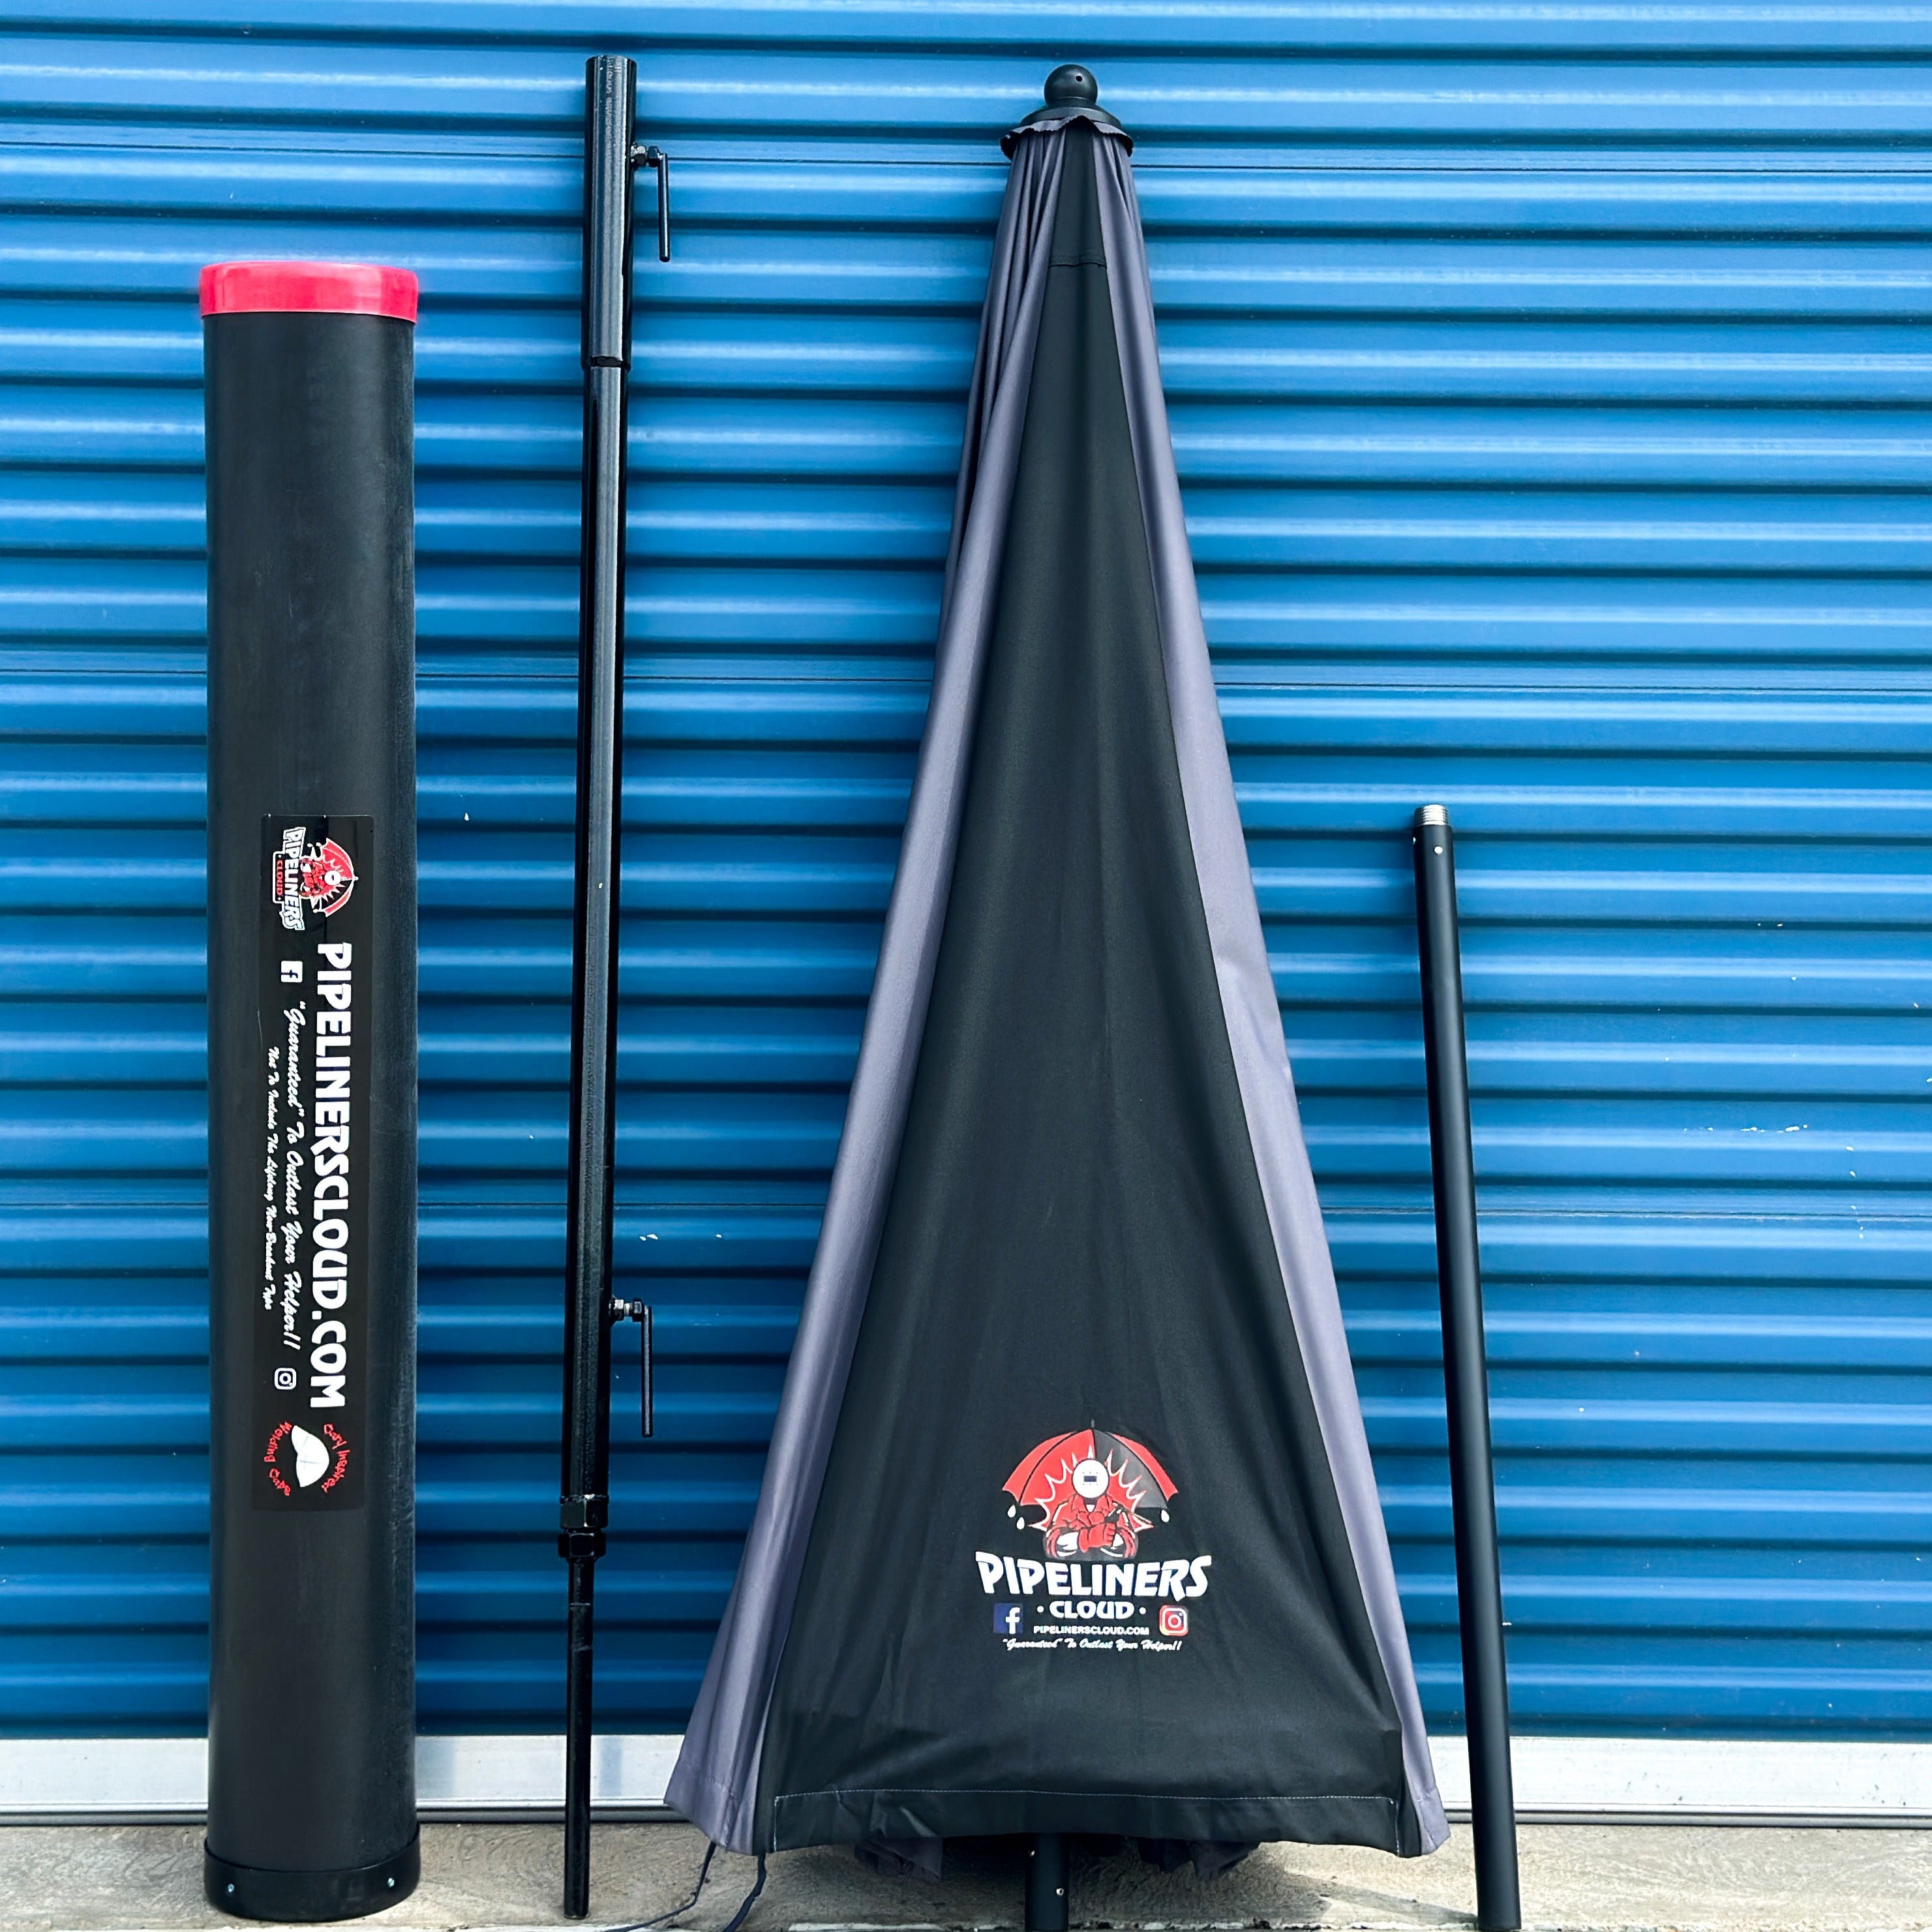 Pipeliners Cloud Welding Umbrella Shade Systems - Pipeliners Cloud